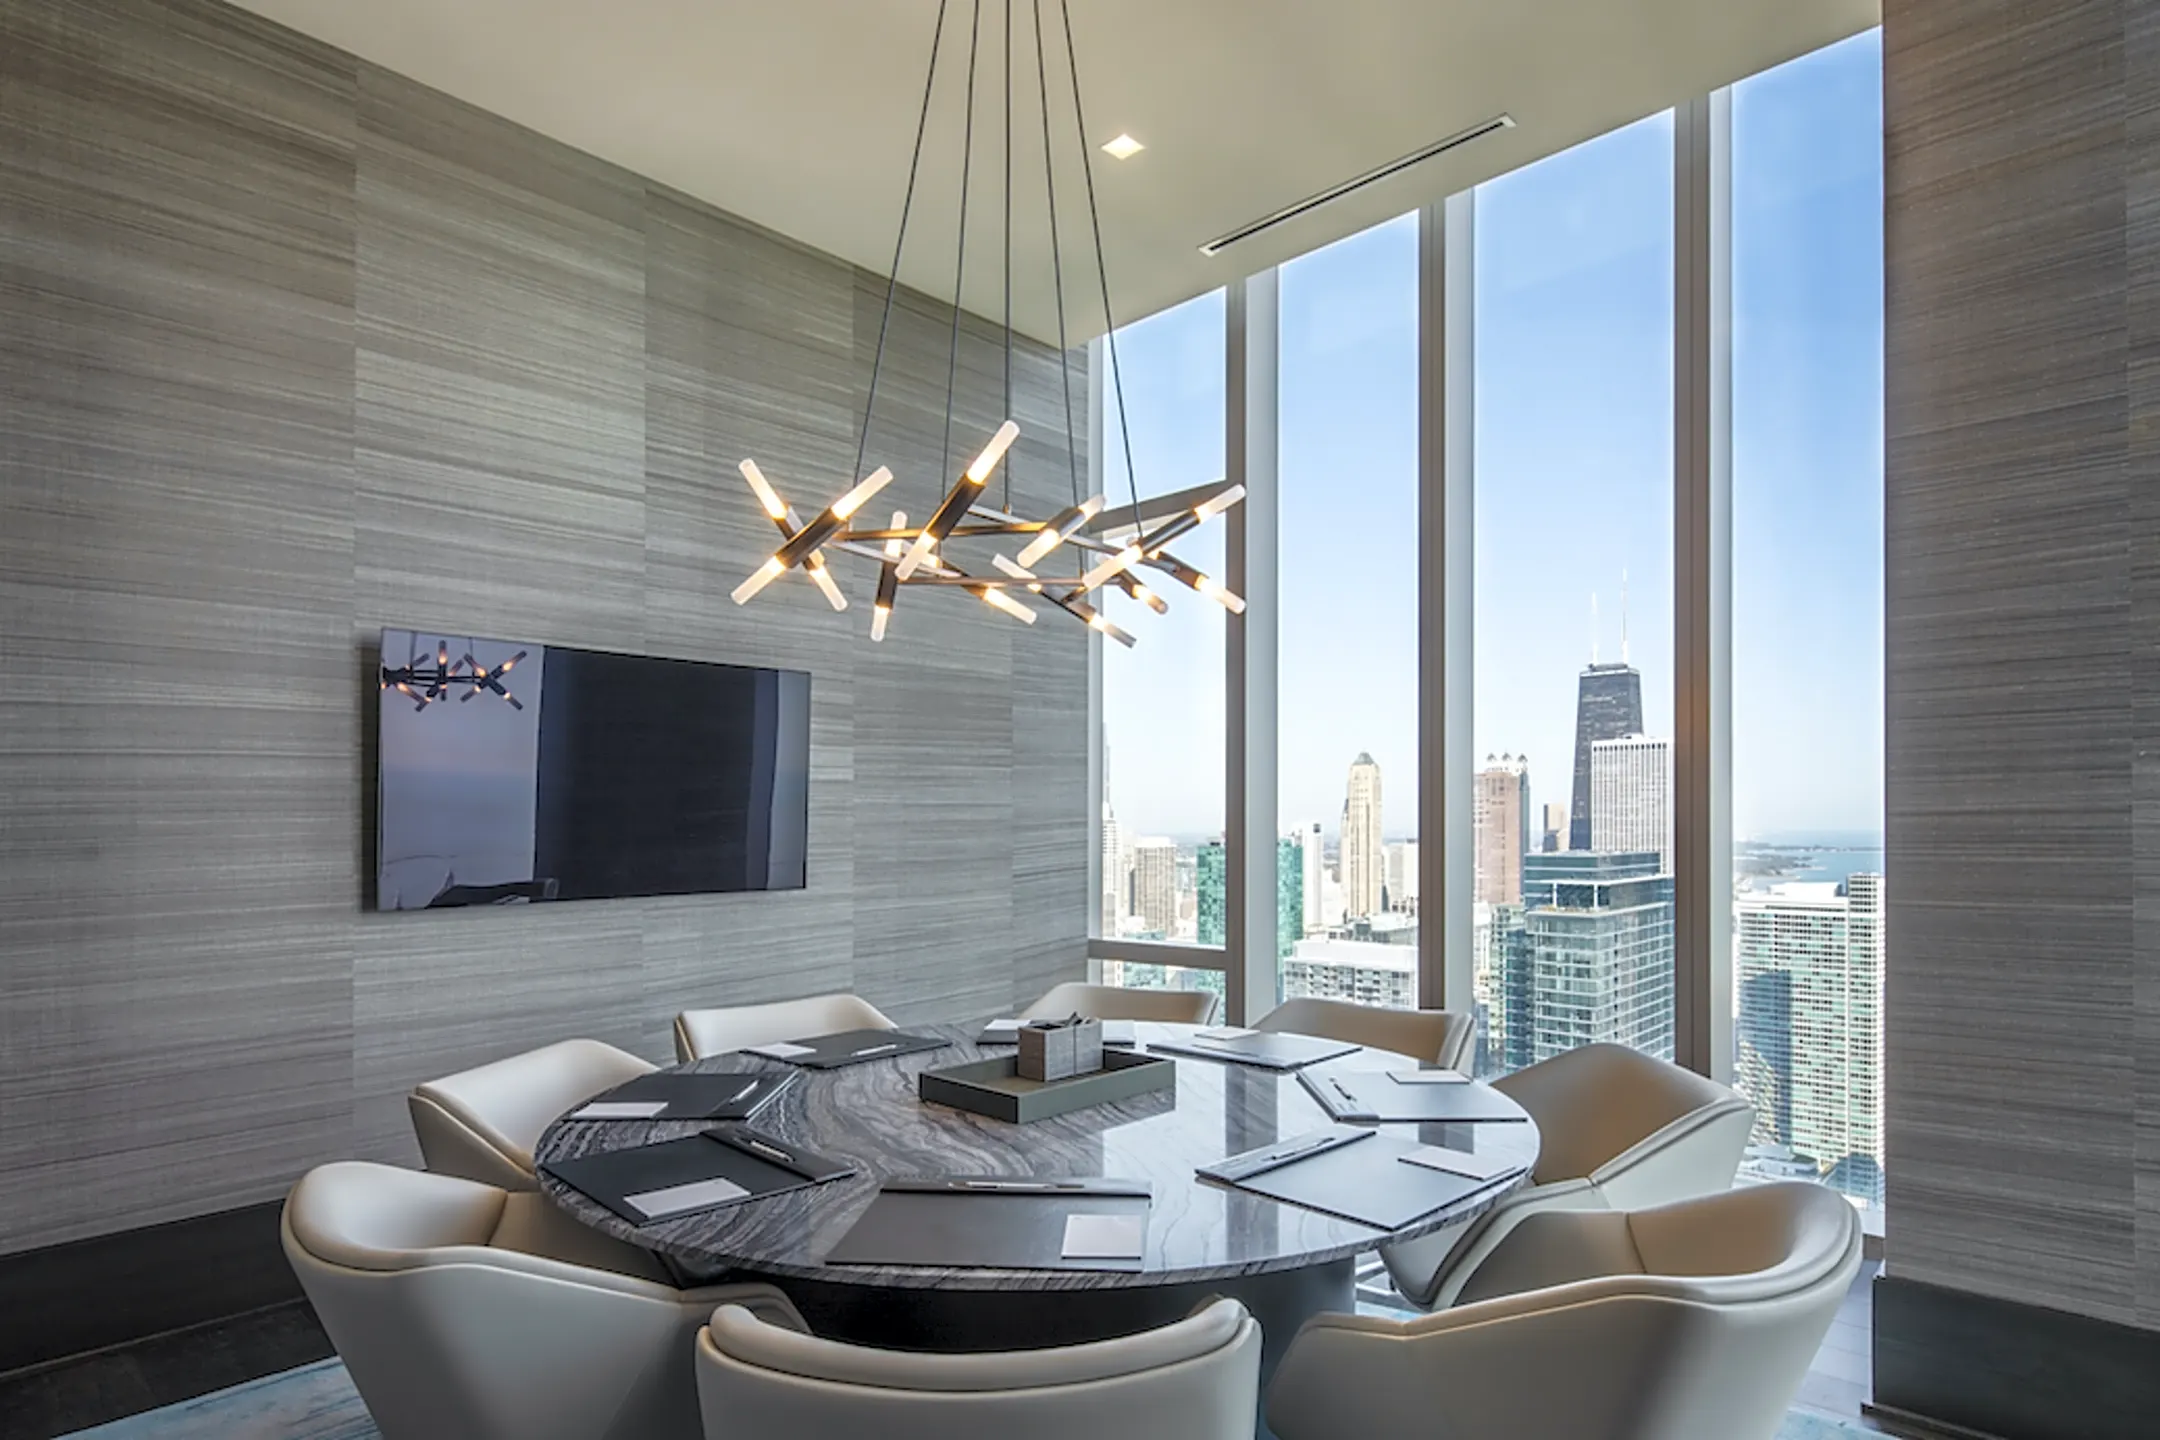 Dining Room - 363 East Wacker Drive - Chicago, IL